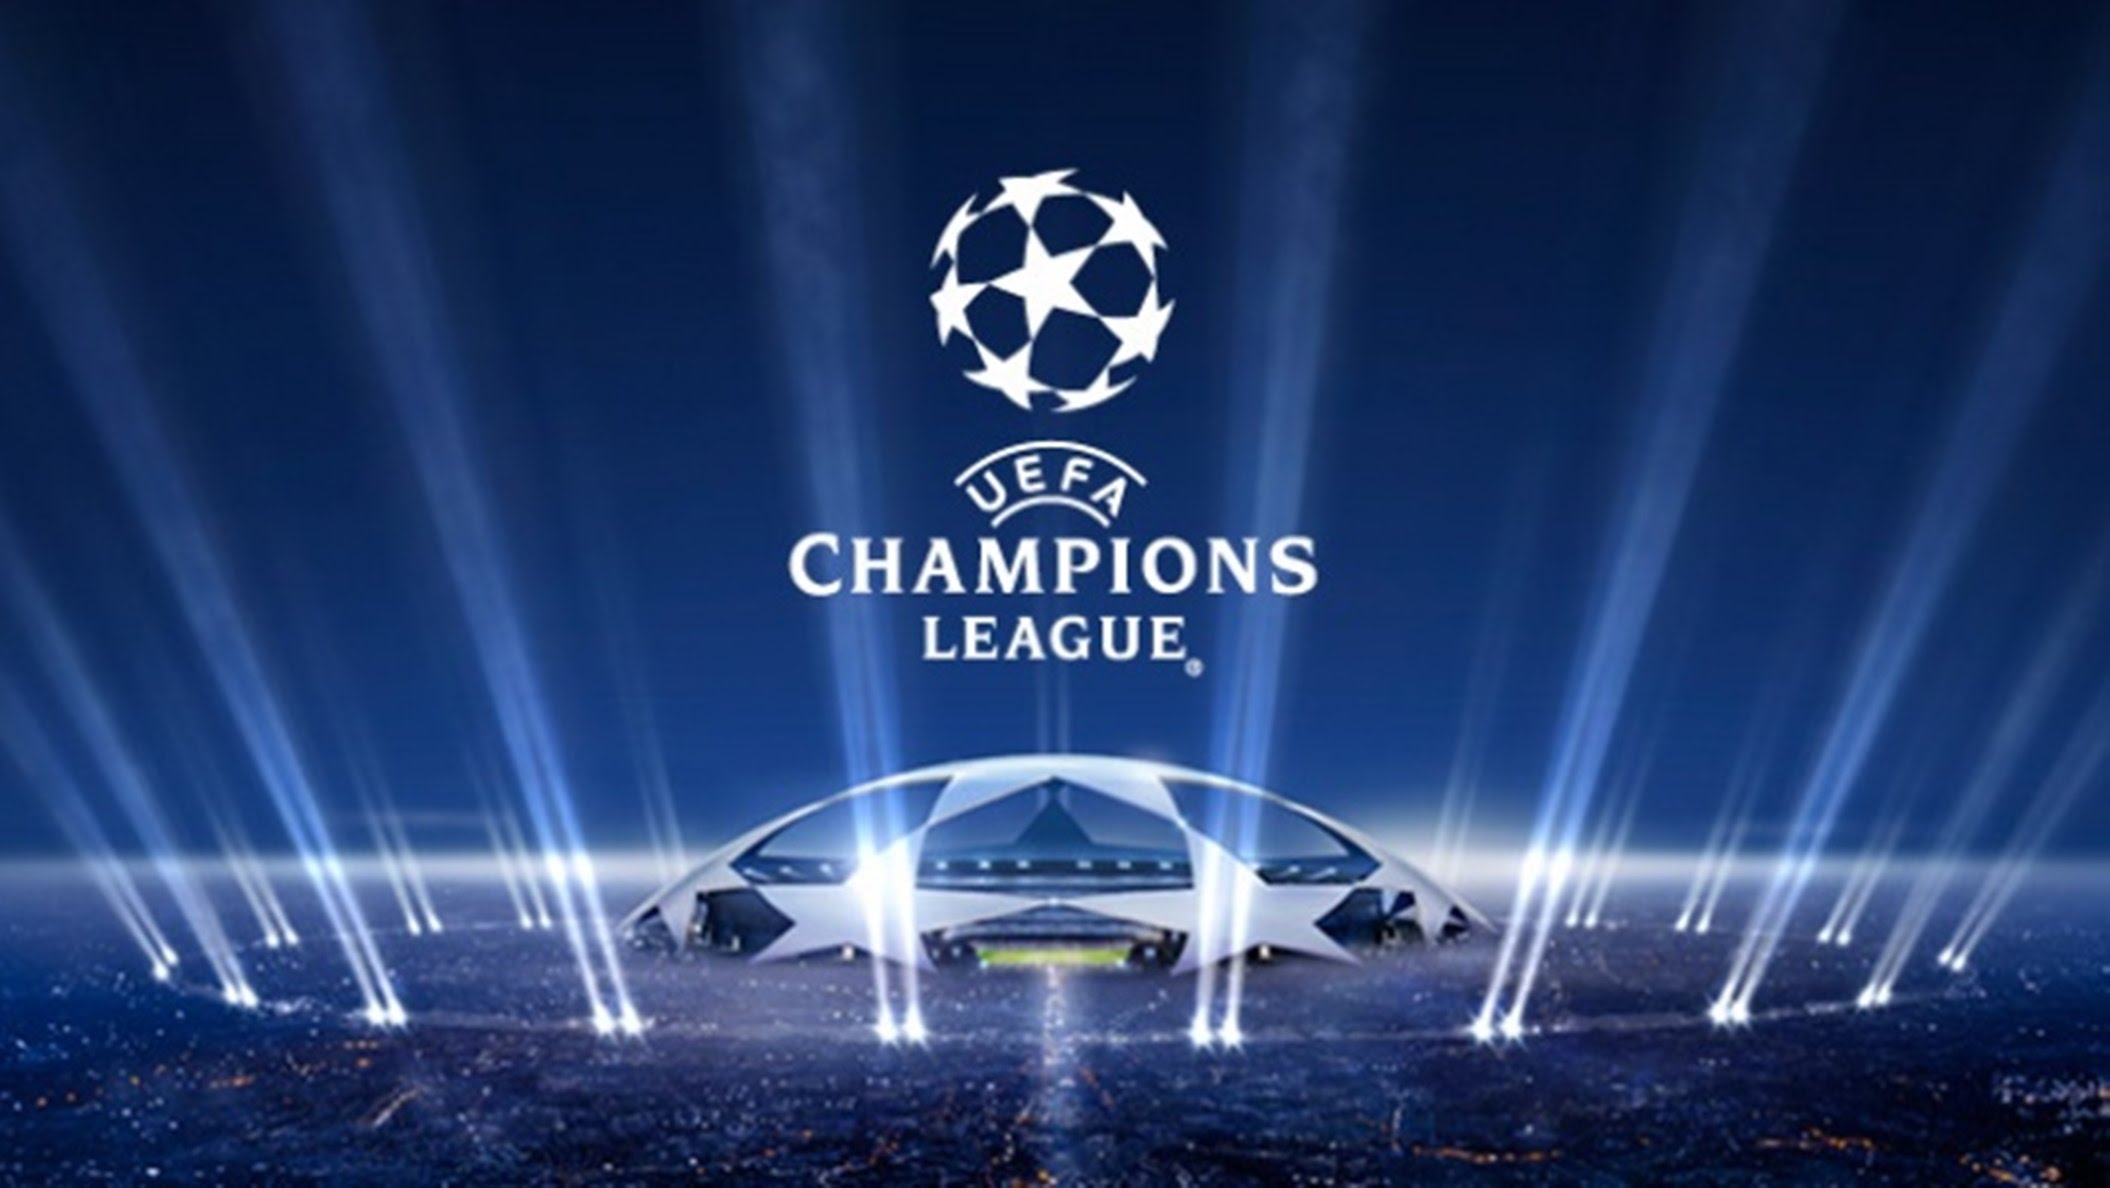 Security Heightened for Champions League Matches Following Threat.